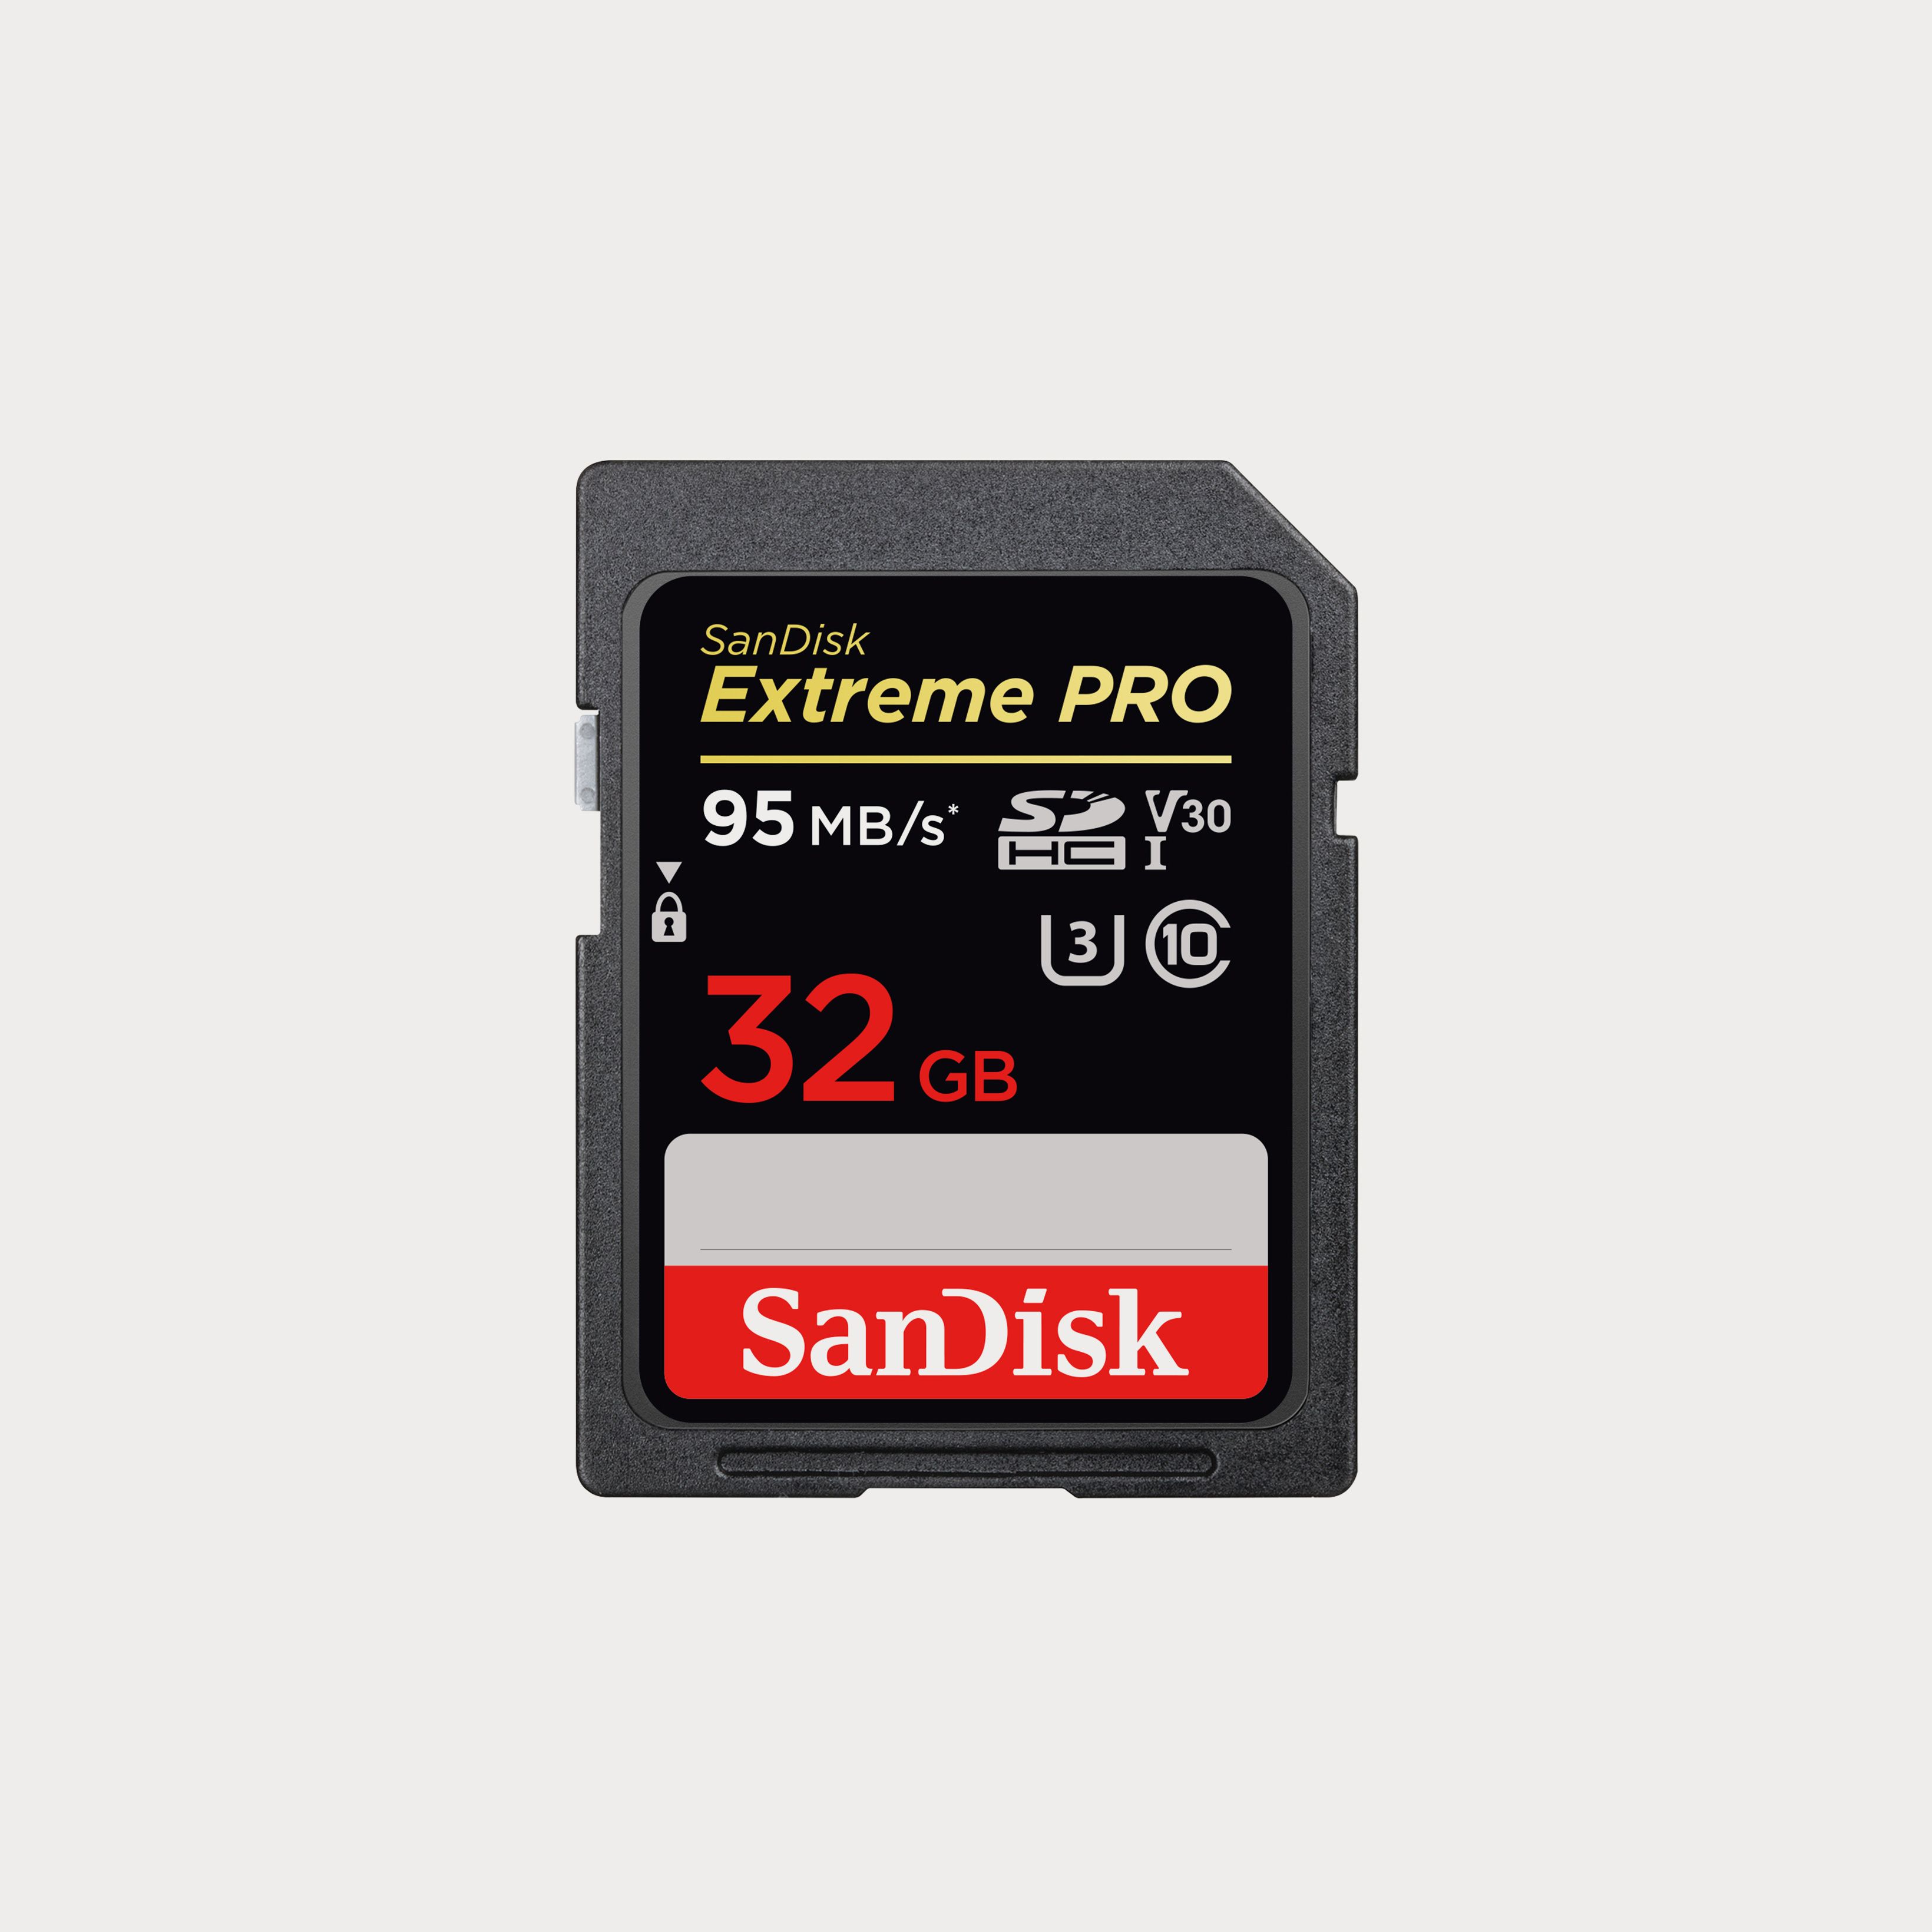 SanDisk Extreme Pro UHS-I - SD Memory Card - 32GB | Moment